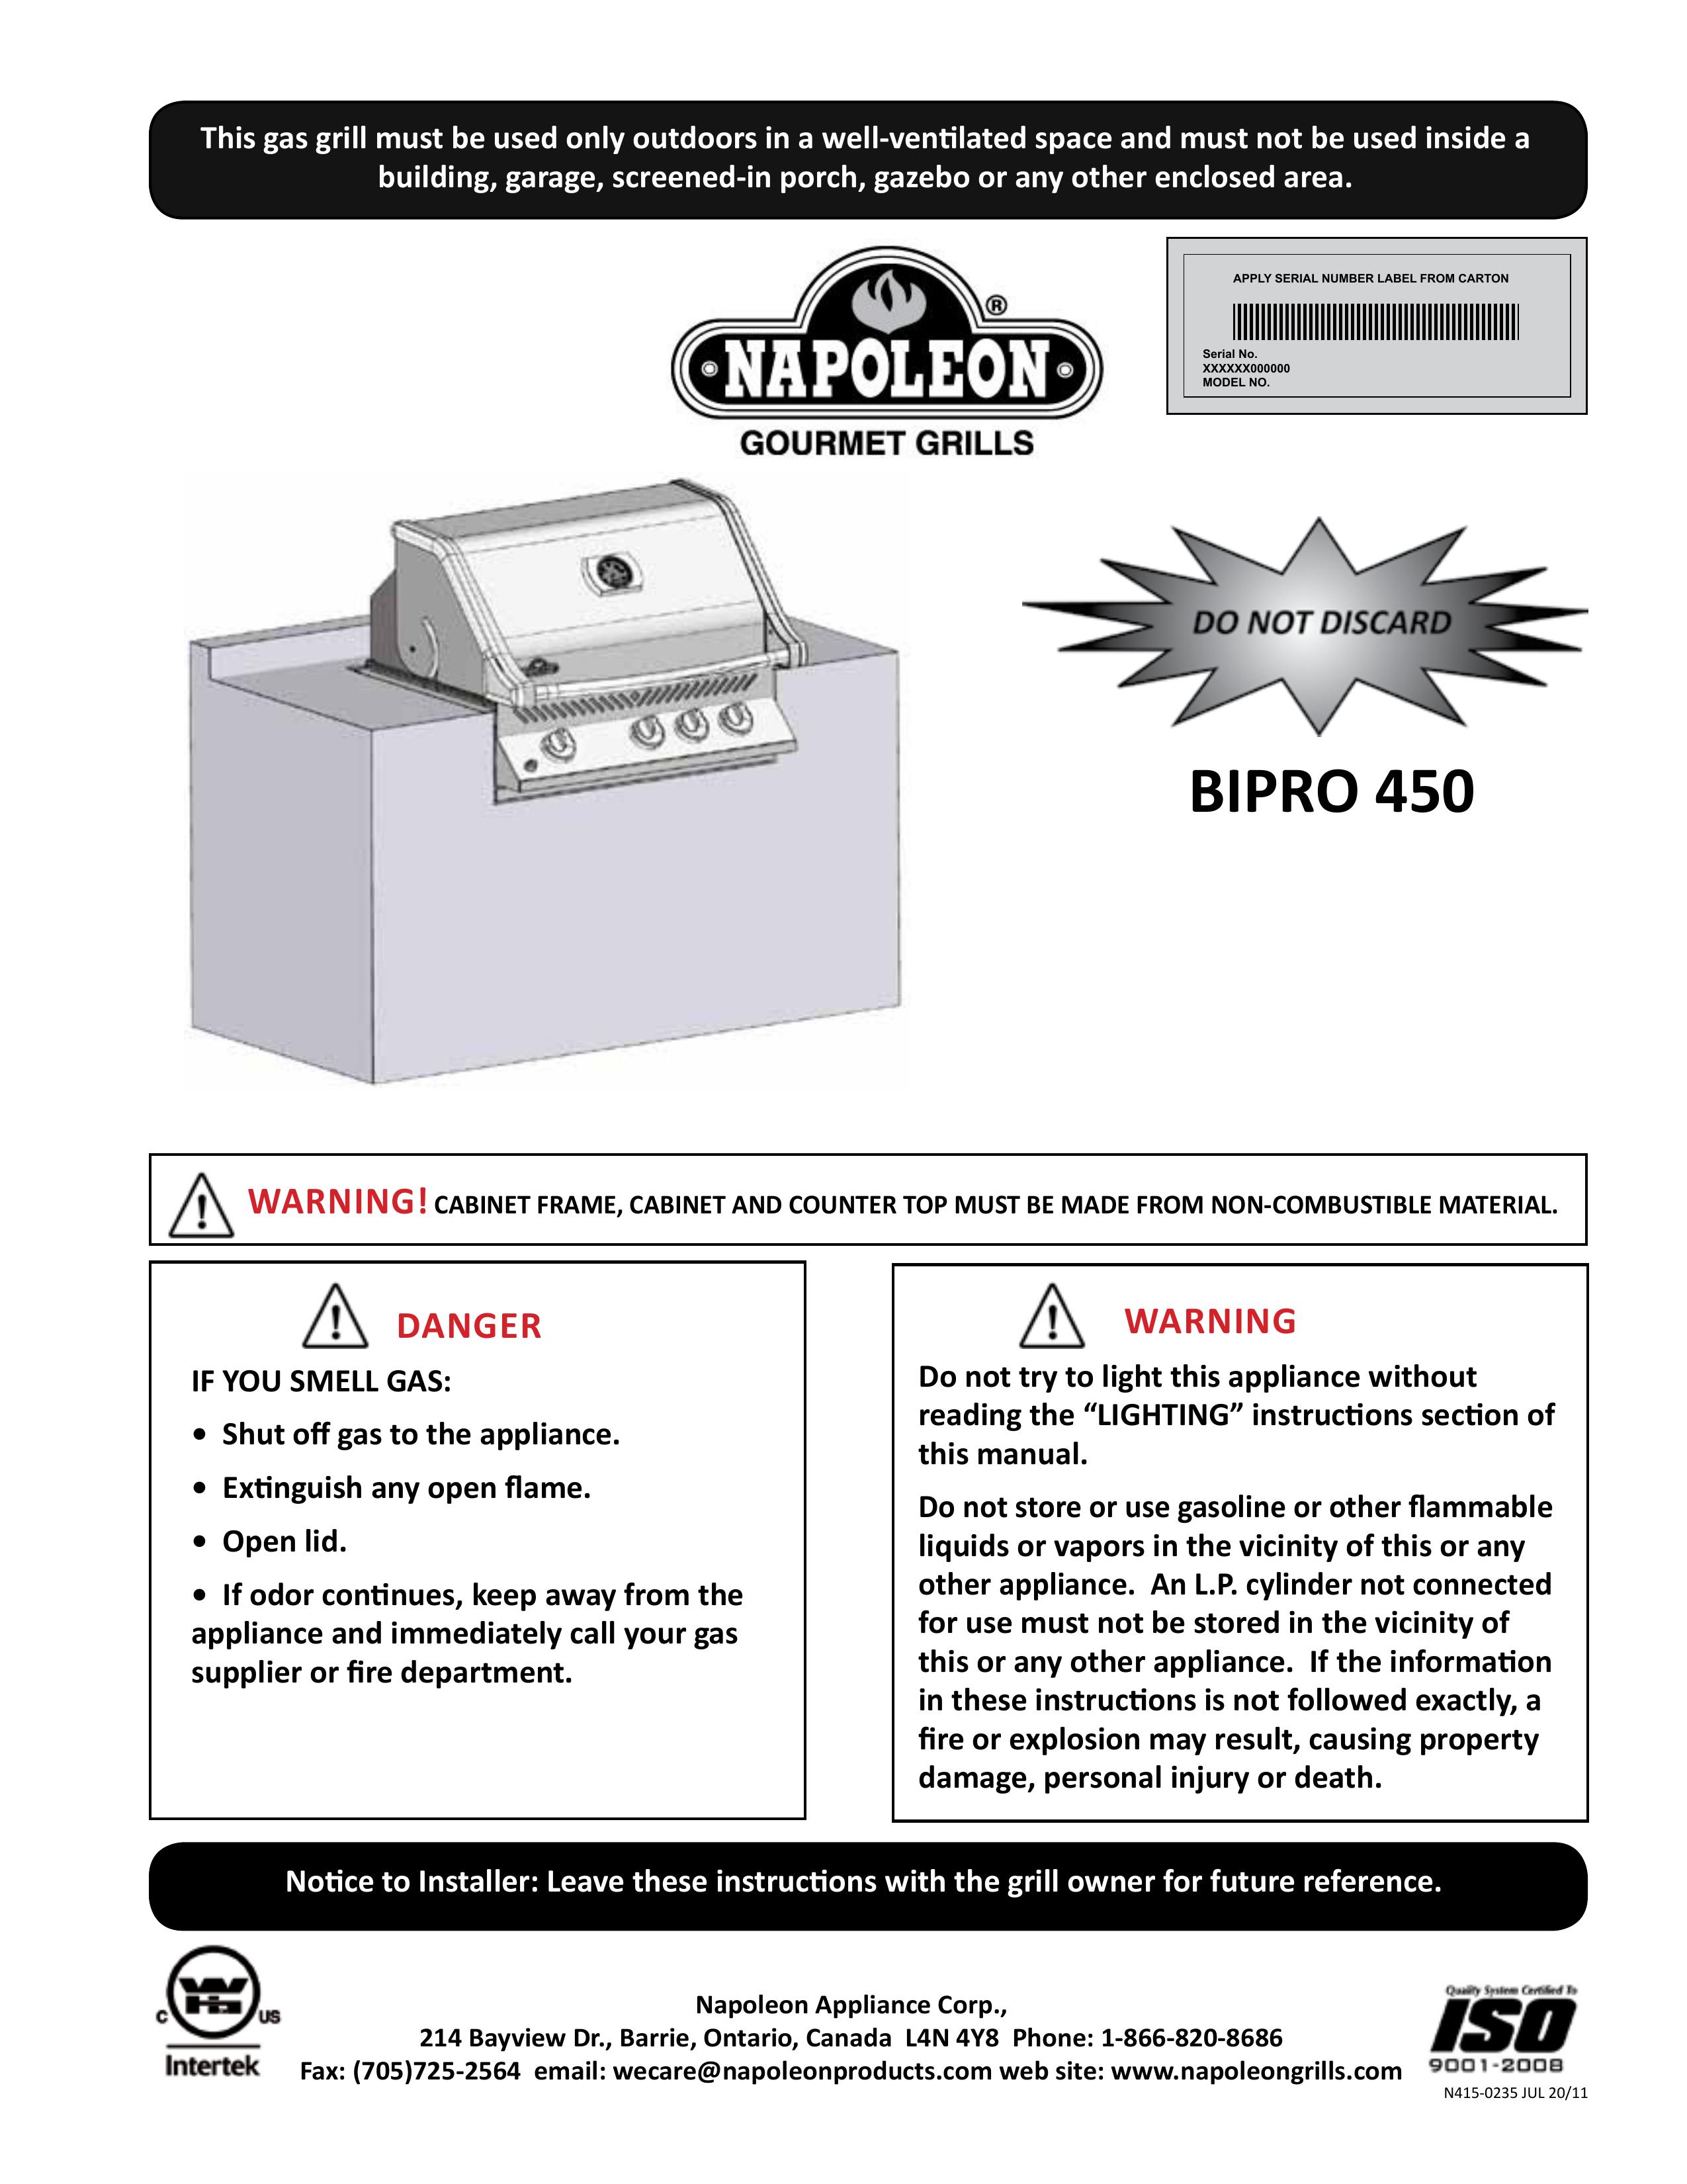 Napoleon Grills BIPRO 450 Gas Grill User Manual